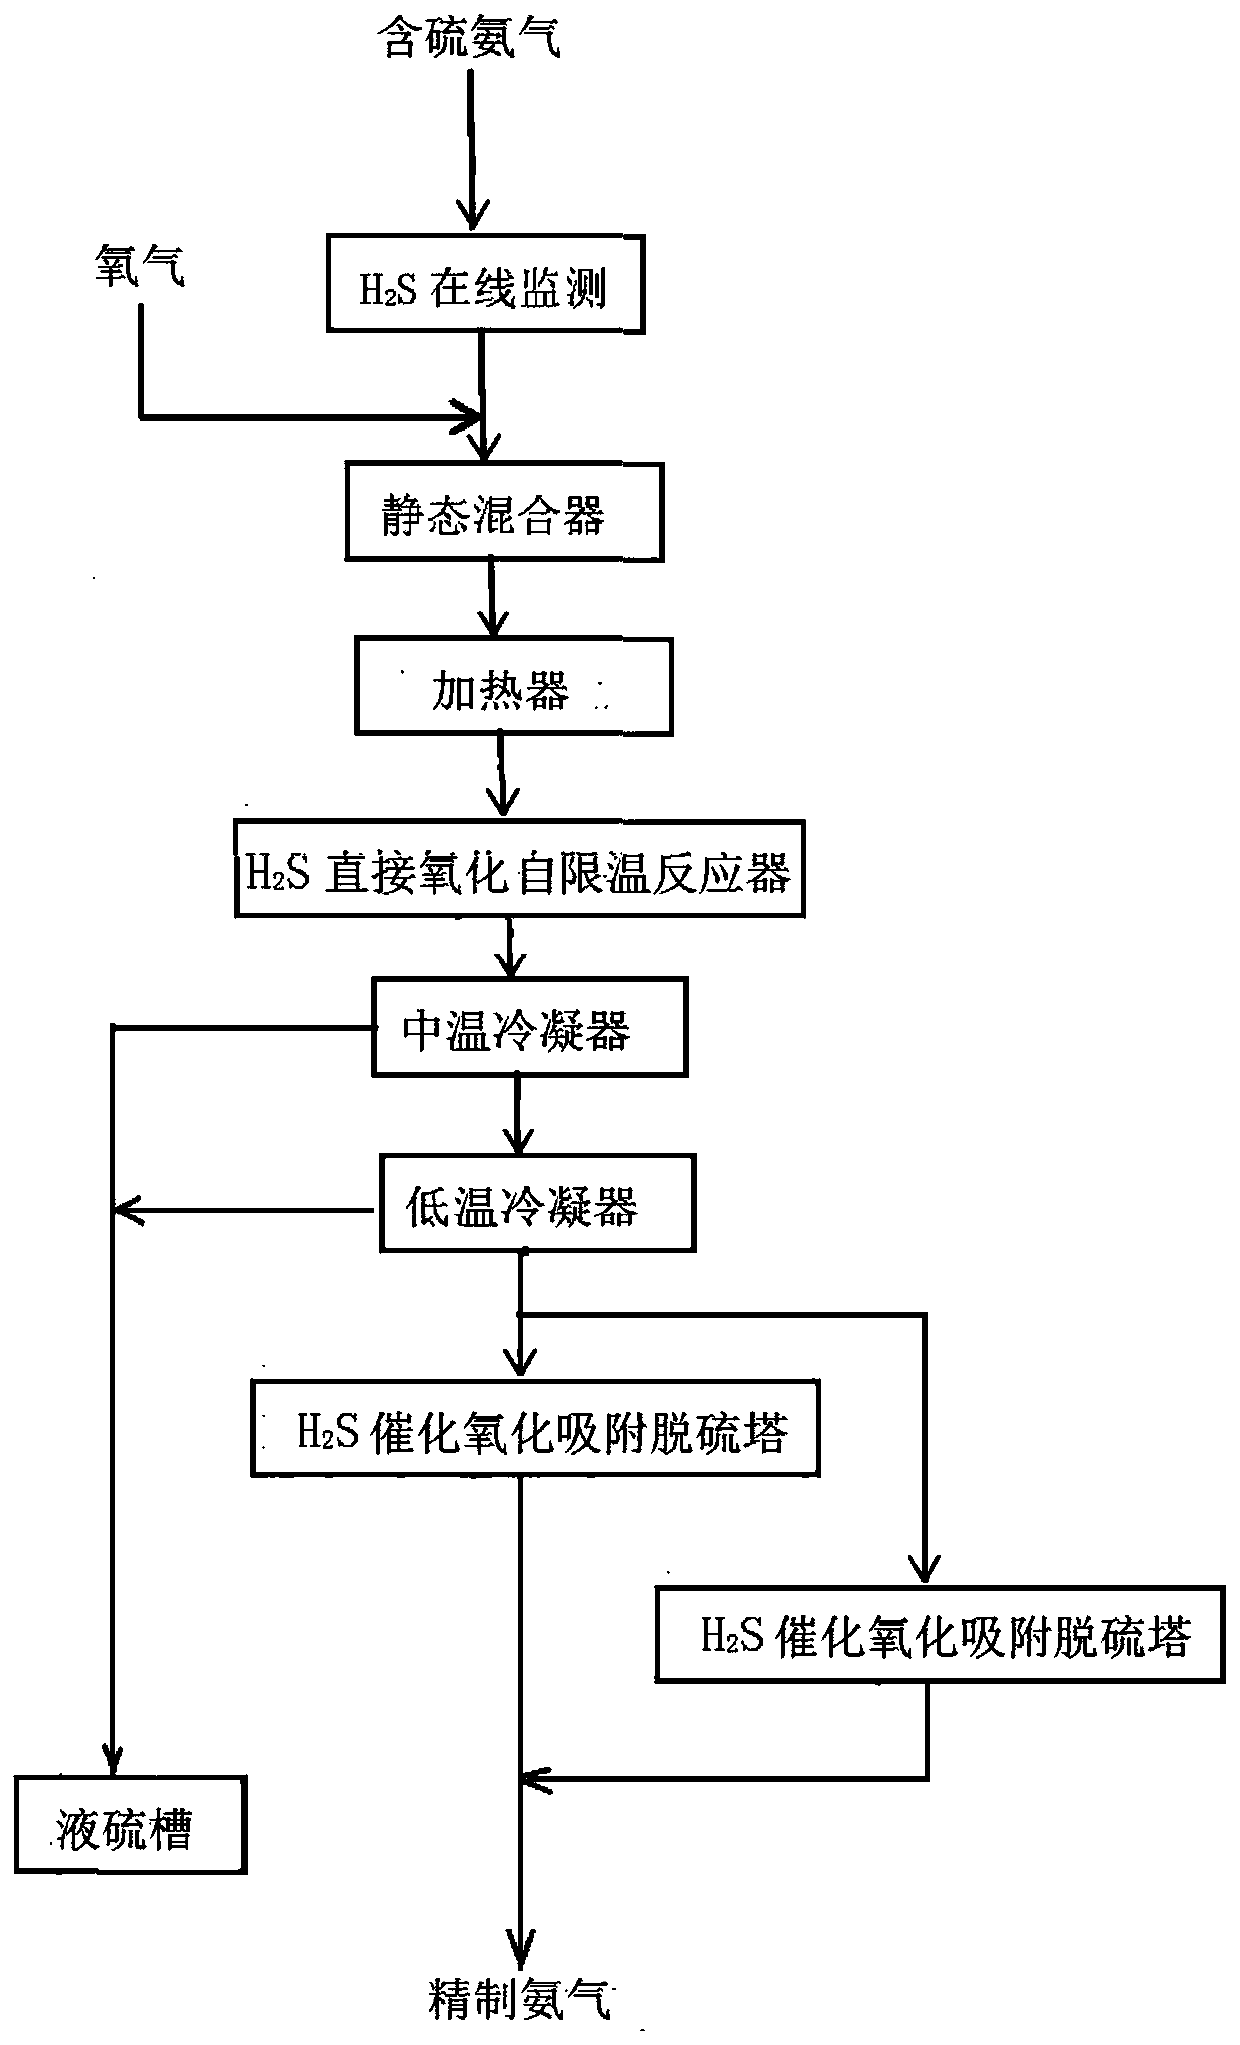 Desulfurization and Purification Process of Sour Water Stripping Ammonia